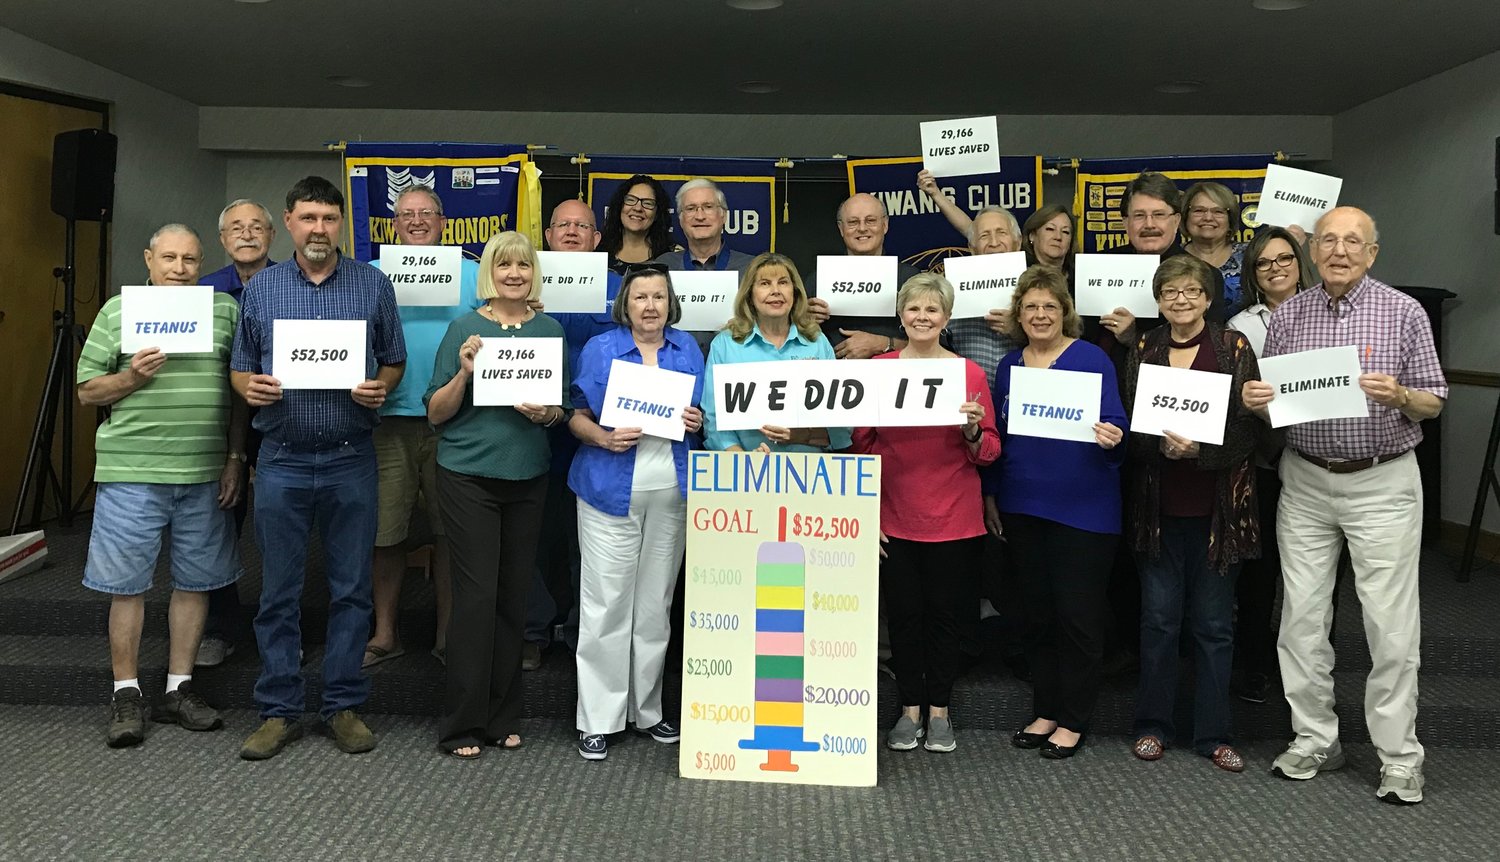 Mineola Kiwanis Club members celebrate reaching their goal for the international Eliminate Project. (Courtesy photo)